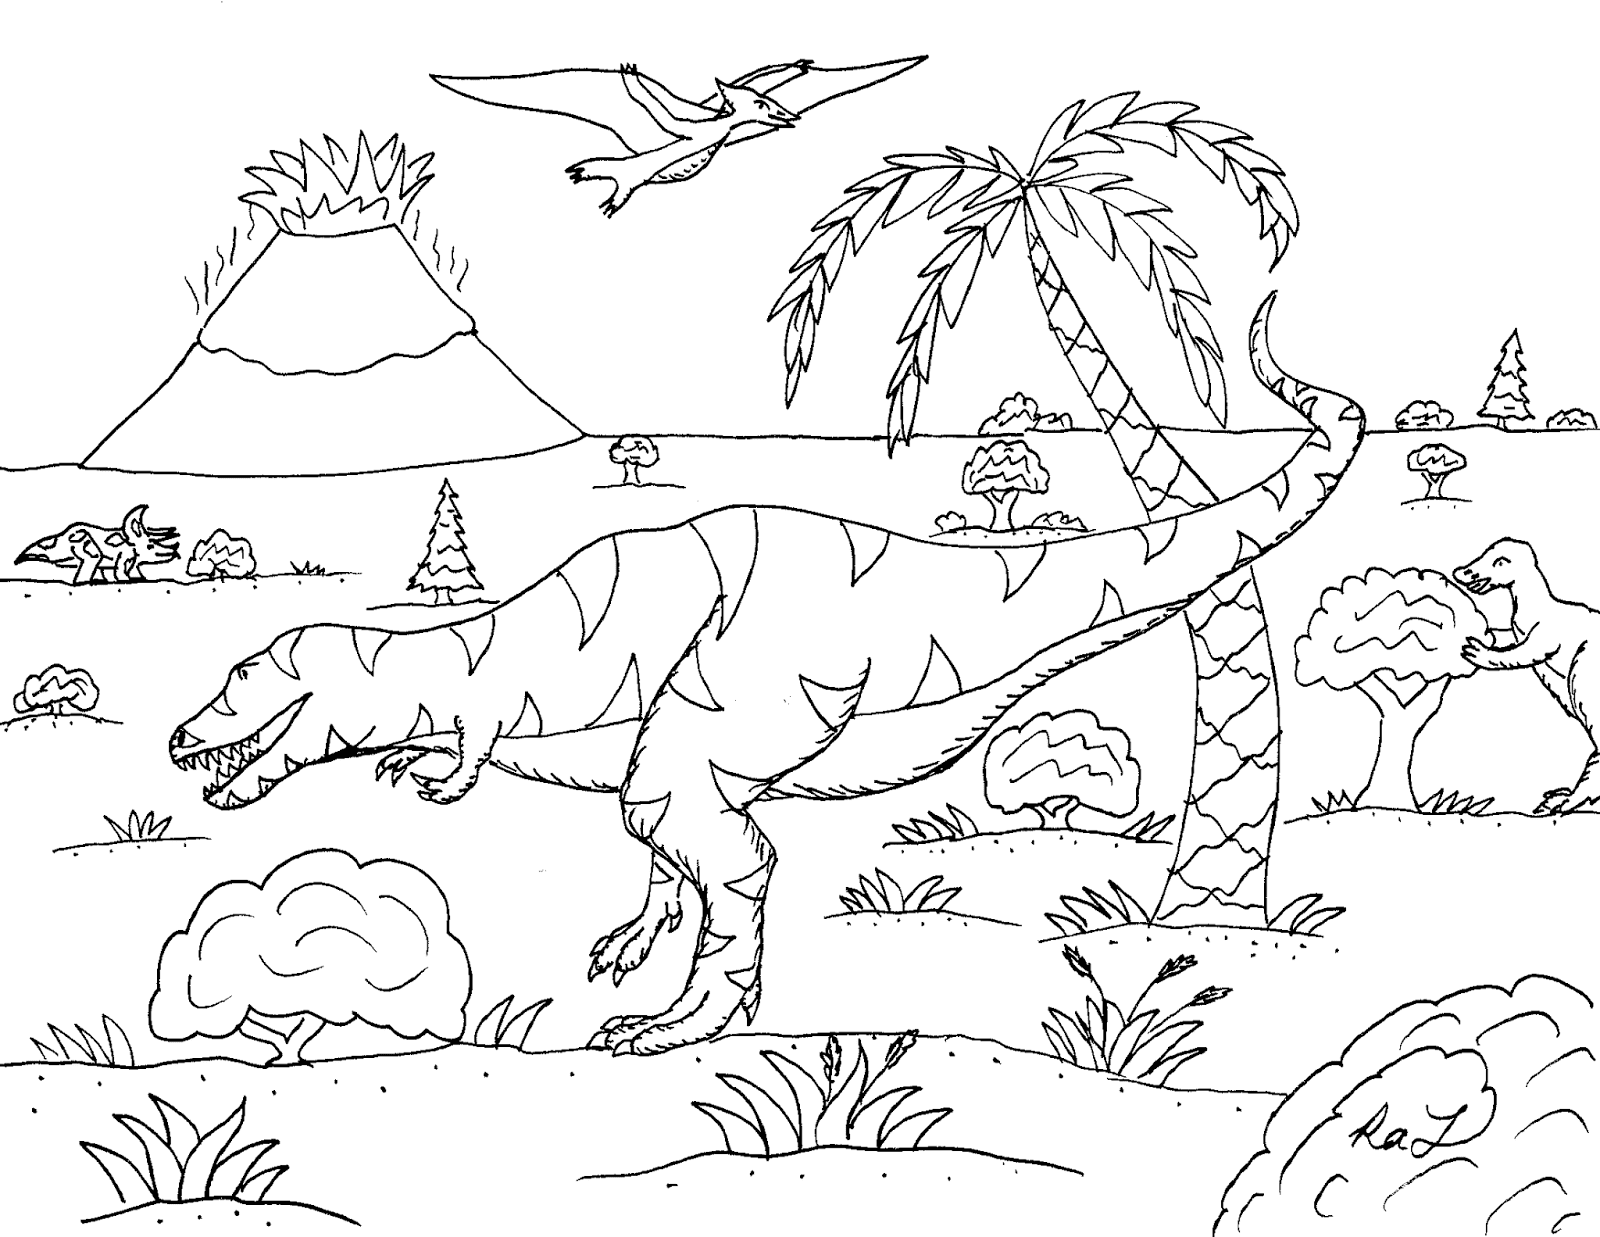 Robin's Great Coloring Pages: T. rex Size, Speed, and Development of ...